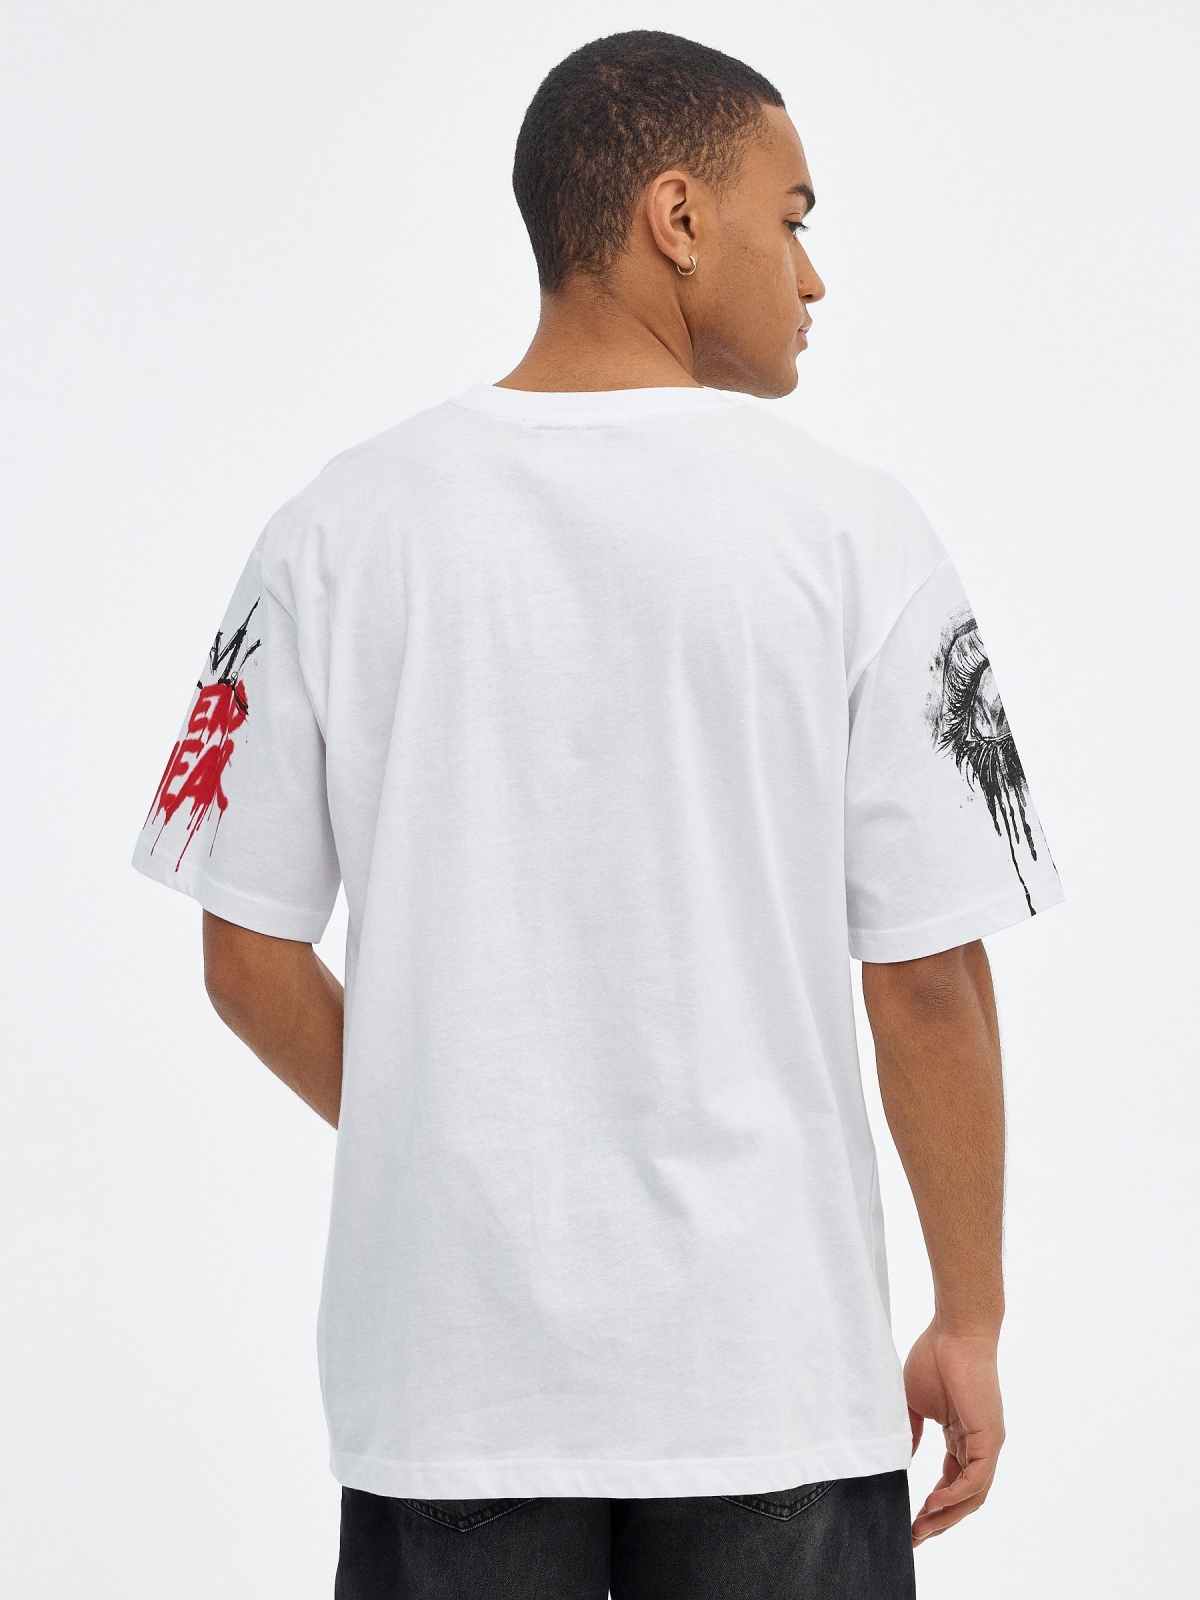 Oversized t-shirt with graffiti print white middle back view